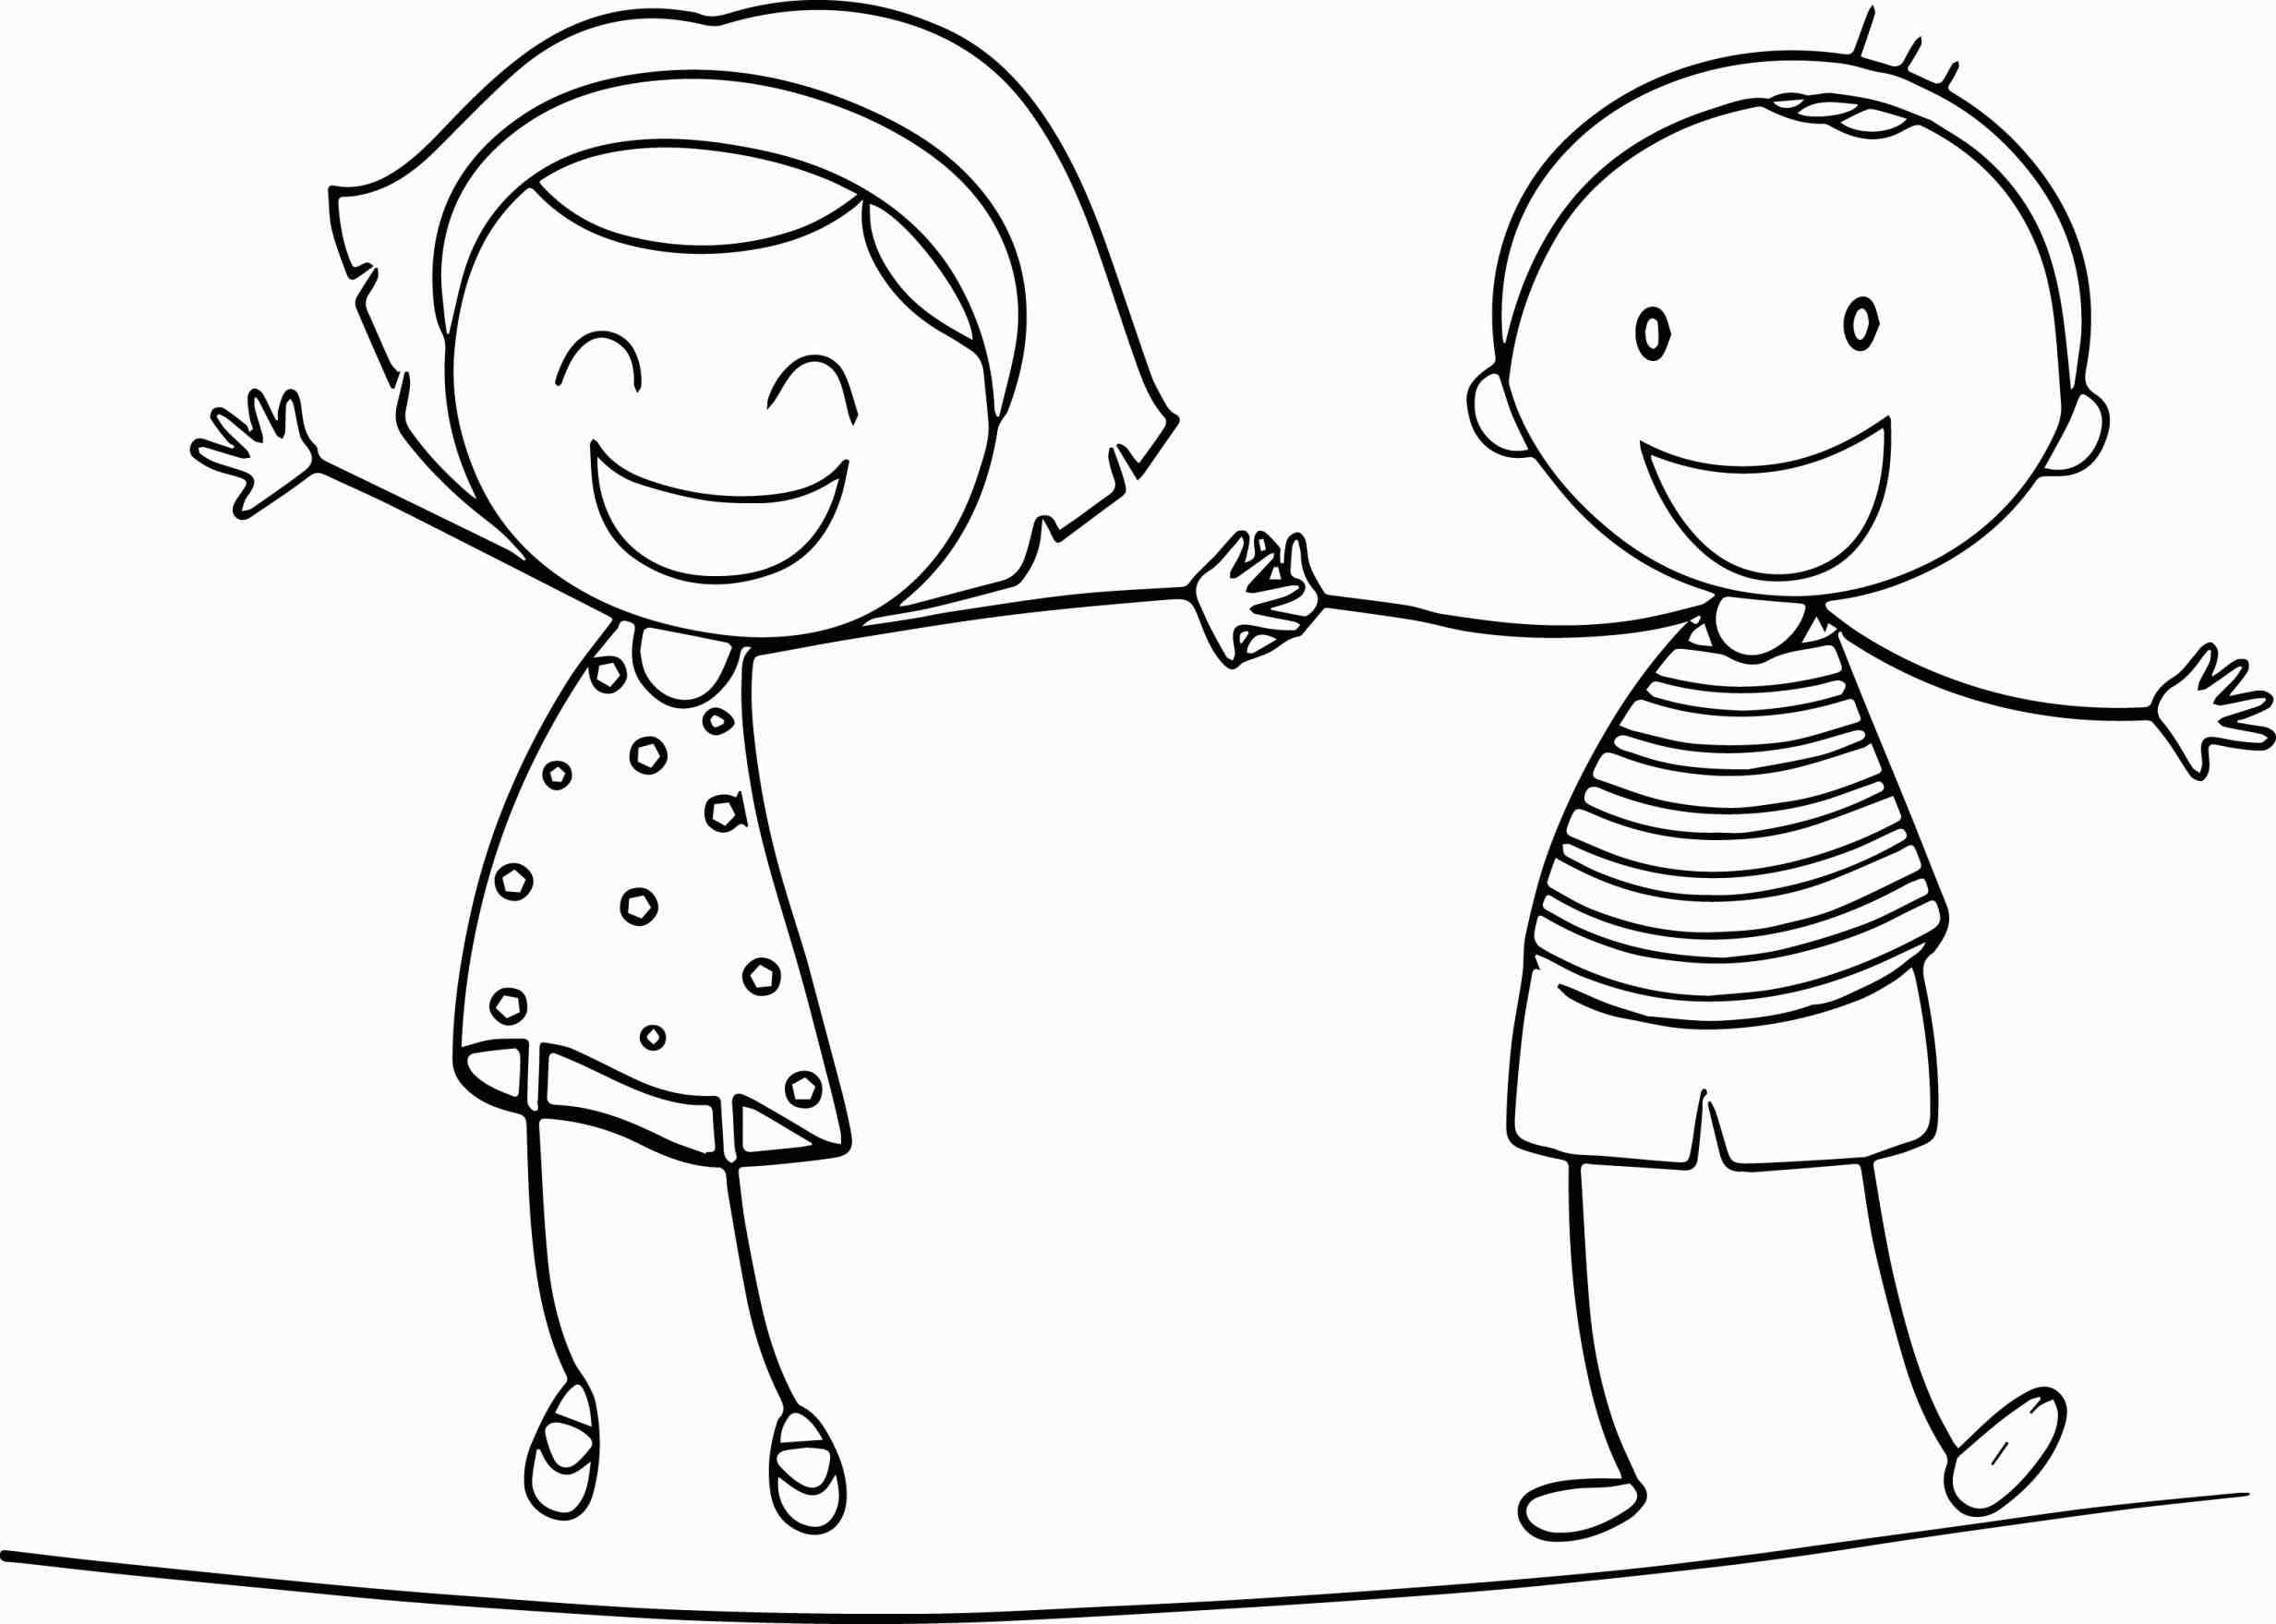 Holding Hands Coloring Pages at GetColorings.com | Free printable ...